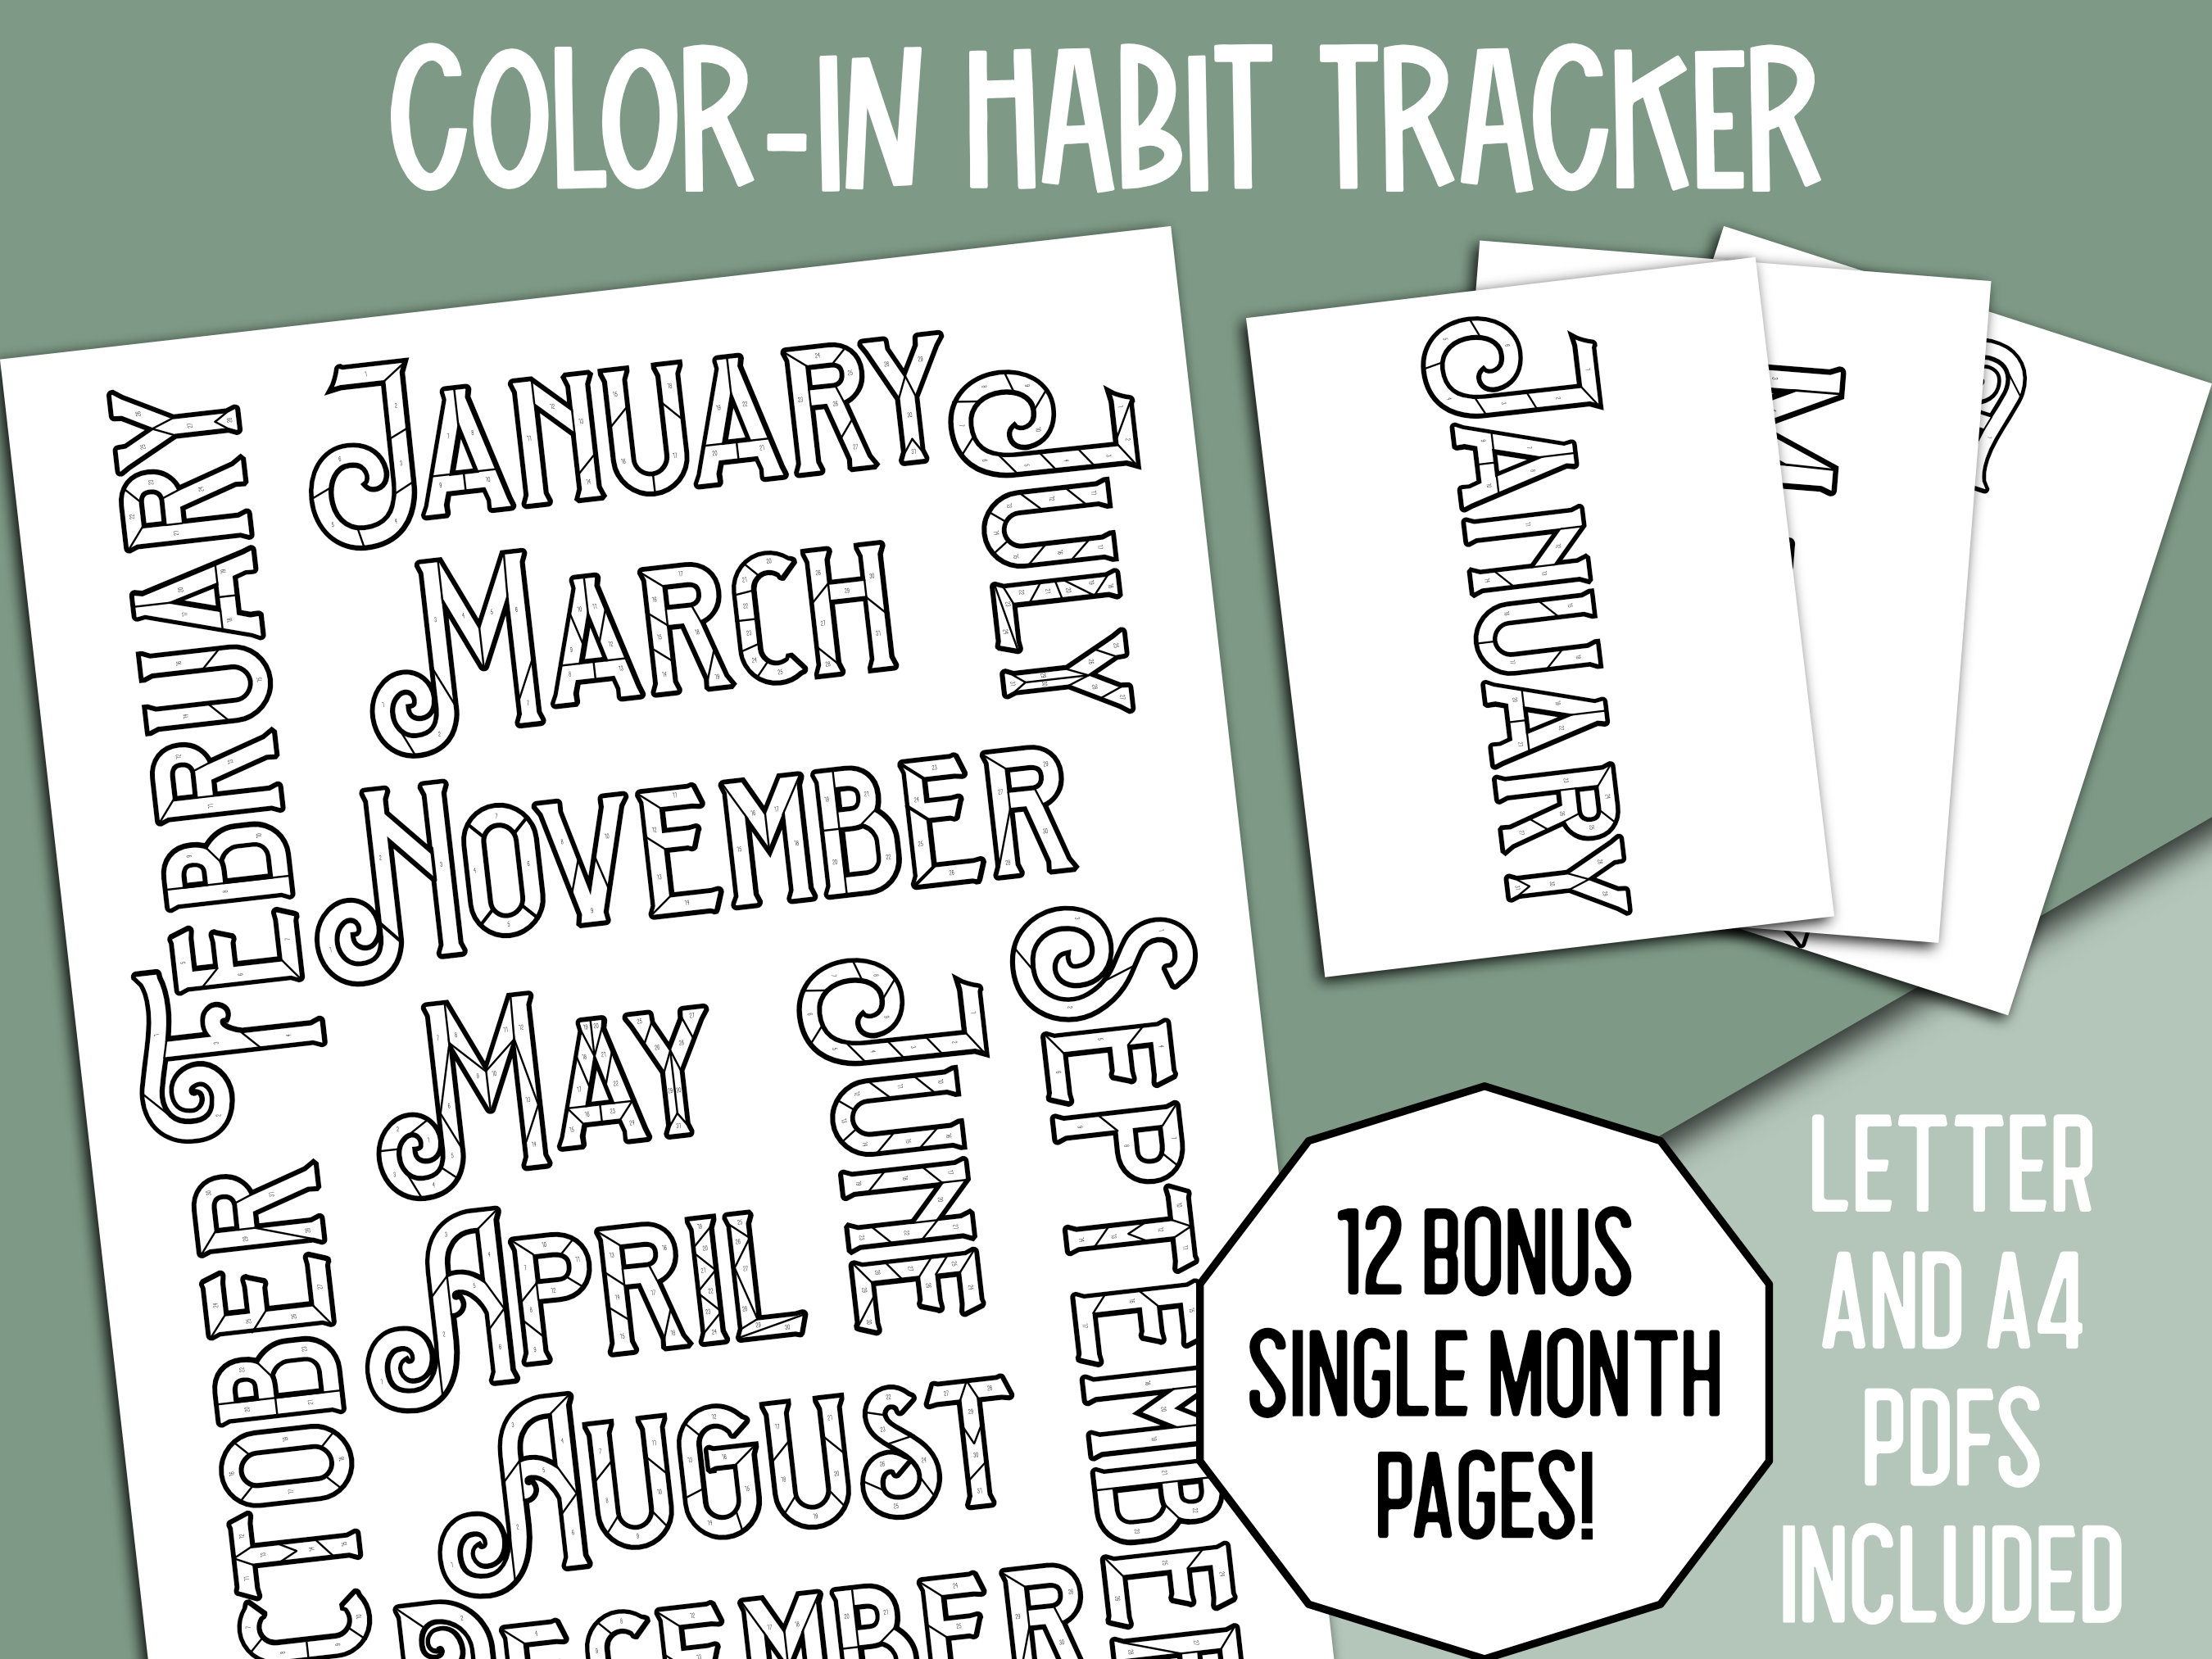 Buy Monthly Color In Habit Tracker Annual Exercise Tracking Daily